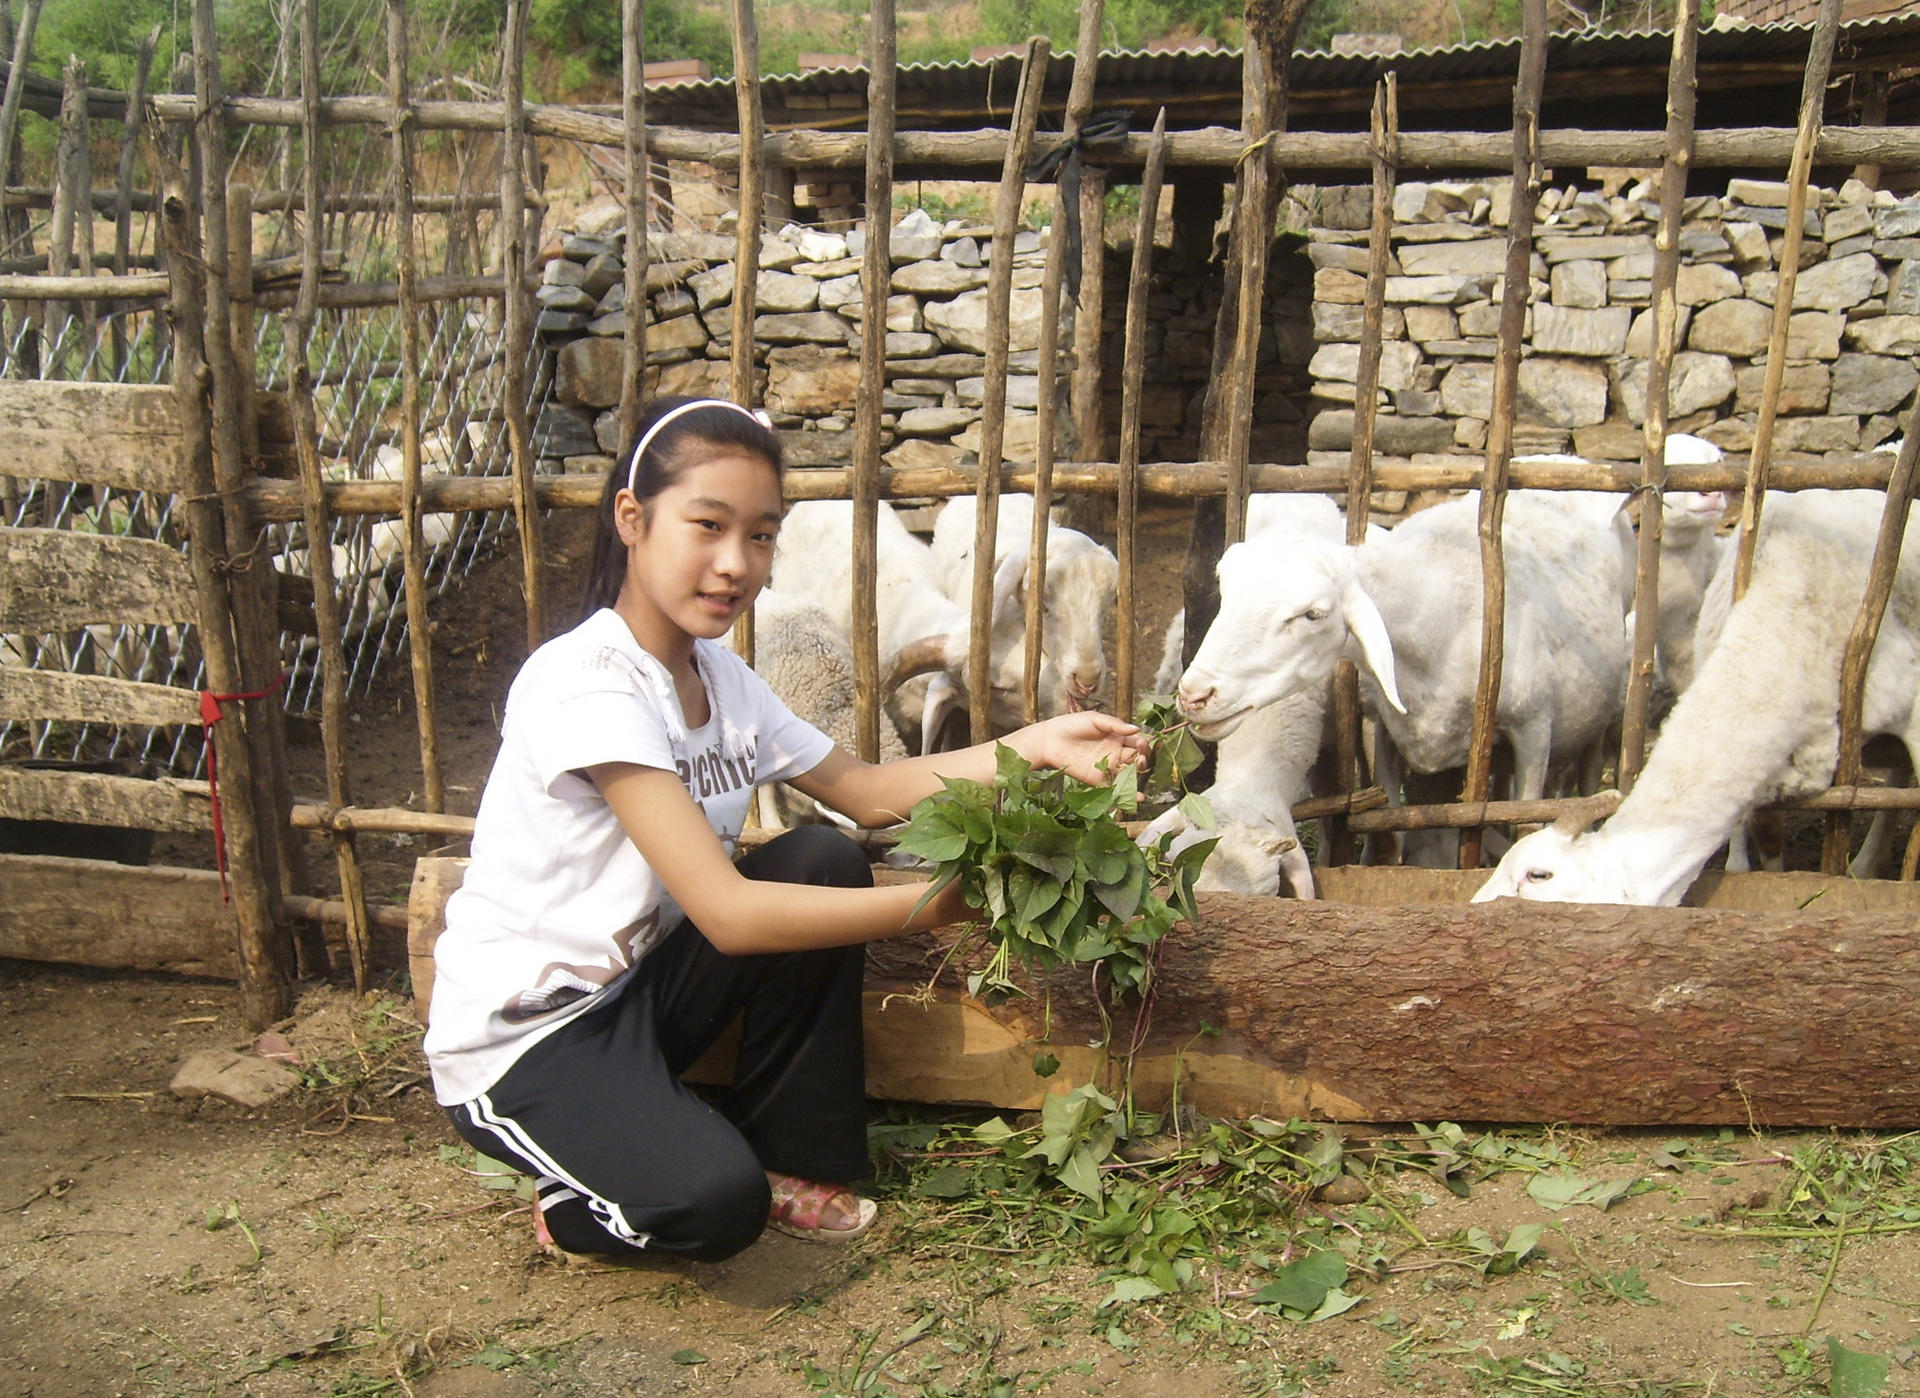 Li Qiang from Hebei can look forward to a brighter future thanks to the goats donated by Heifer International.